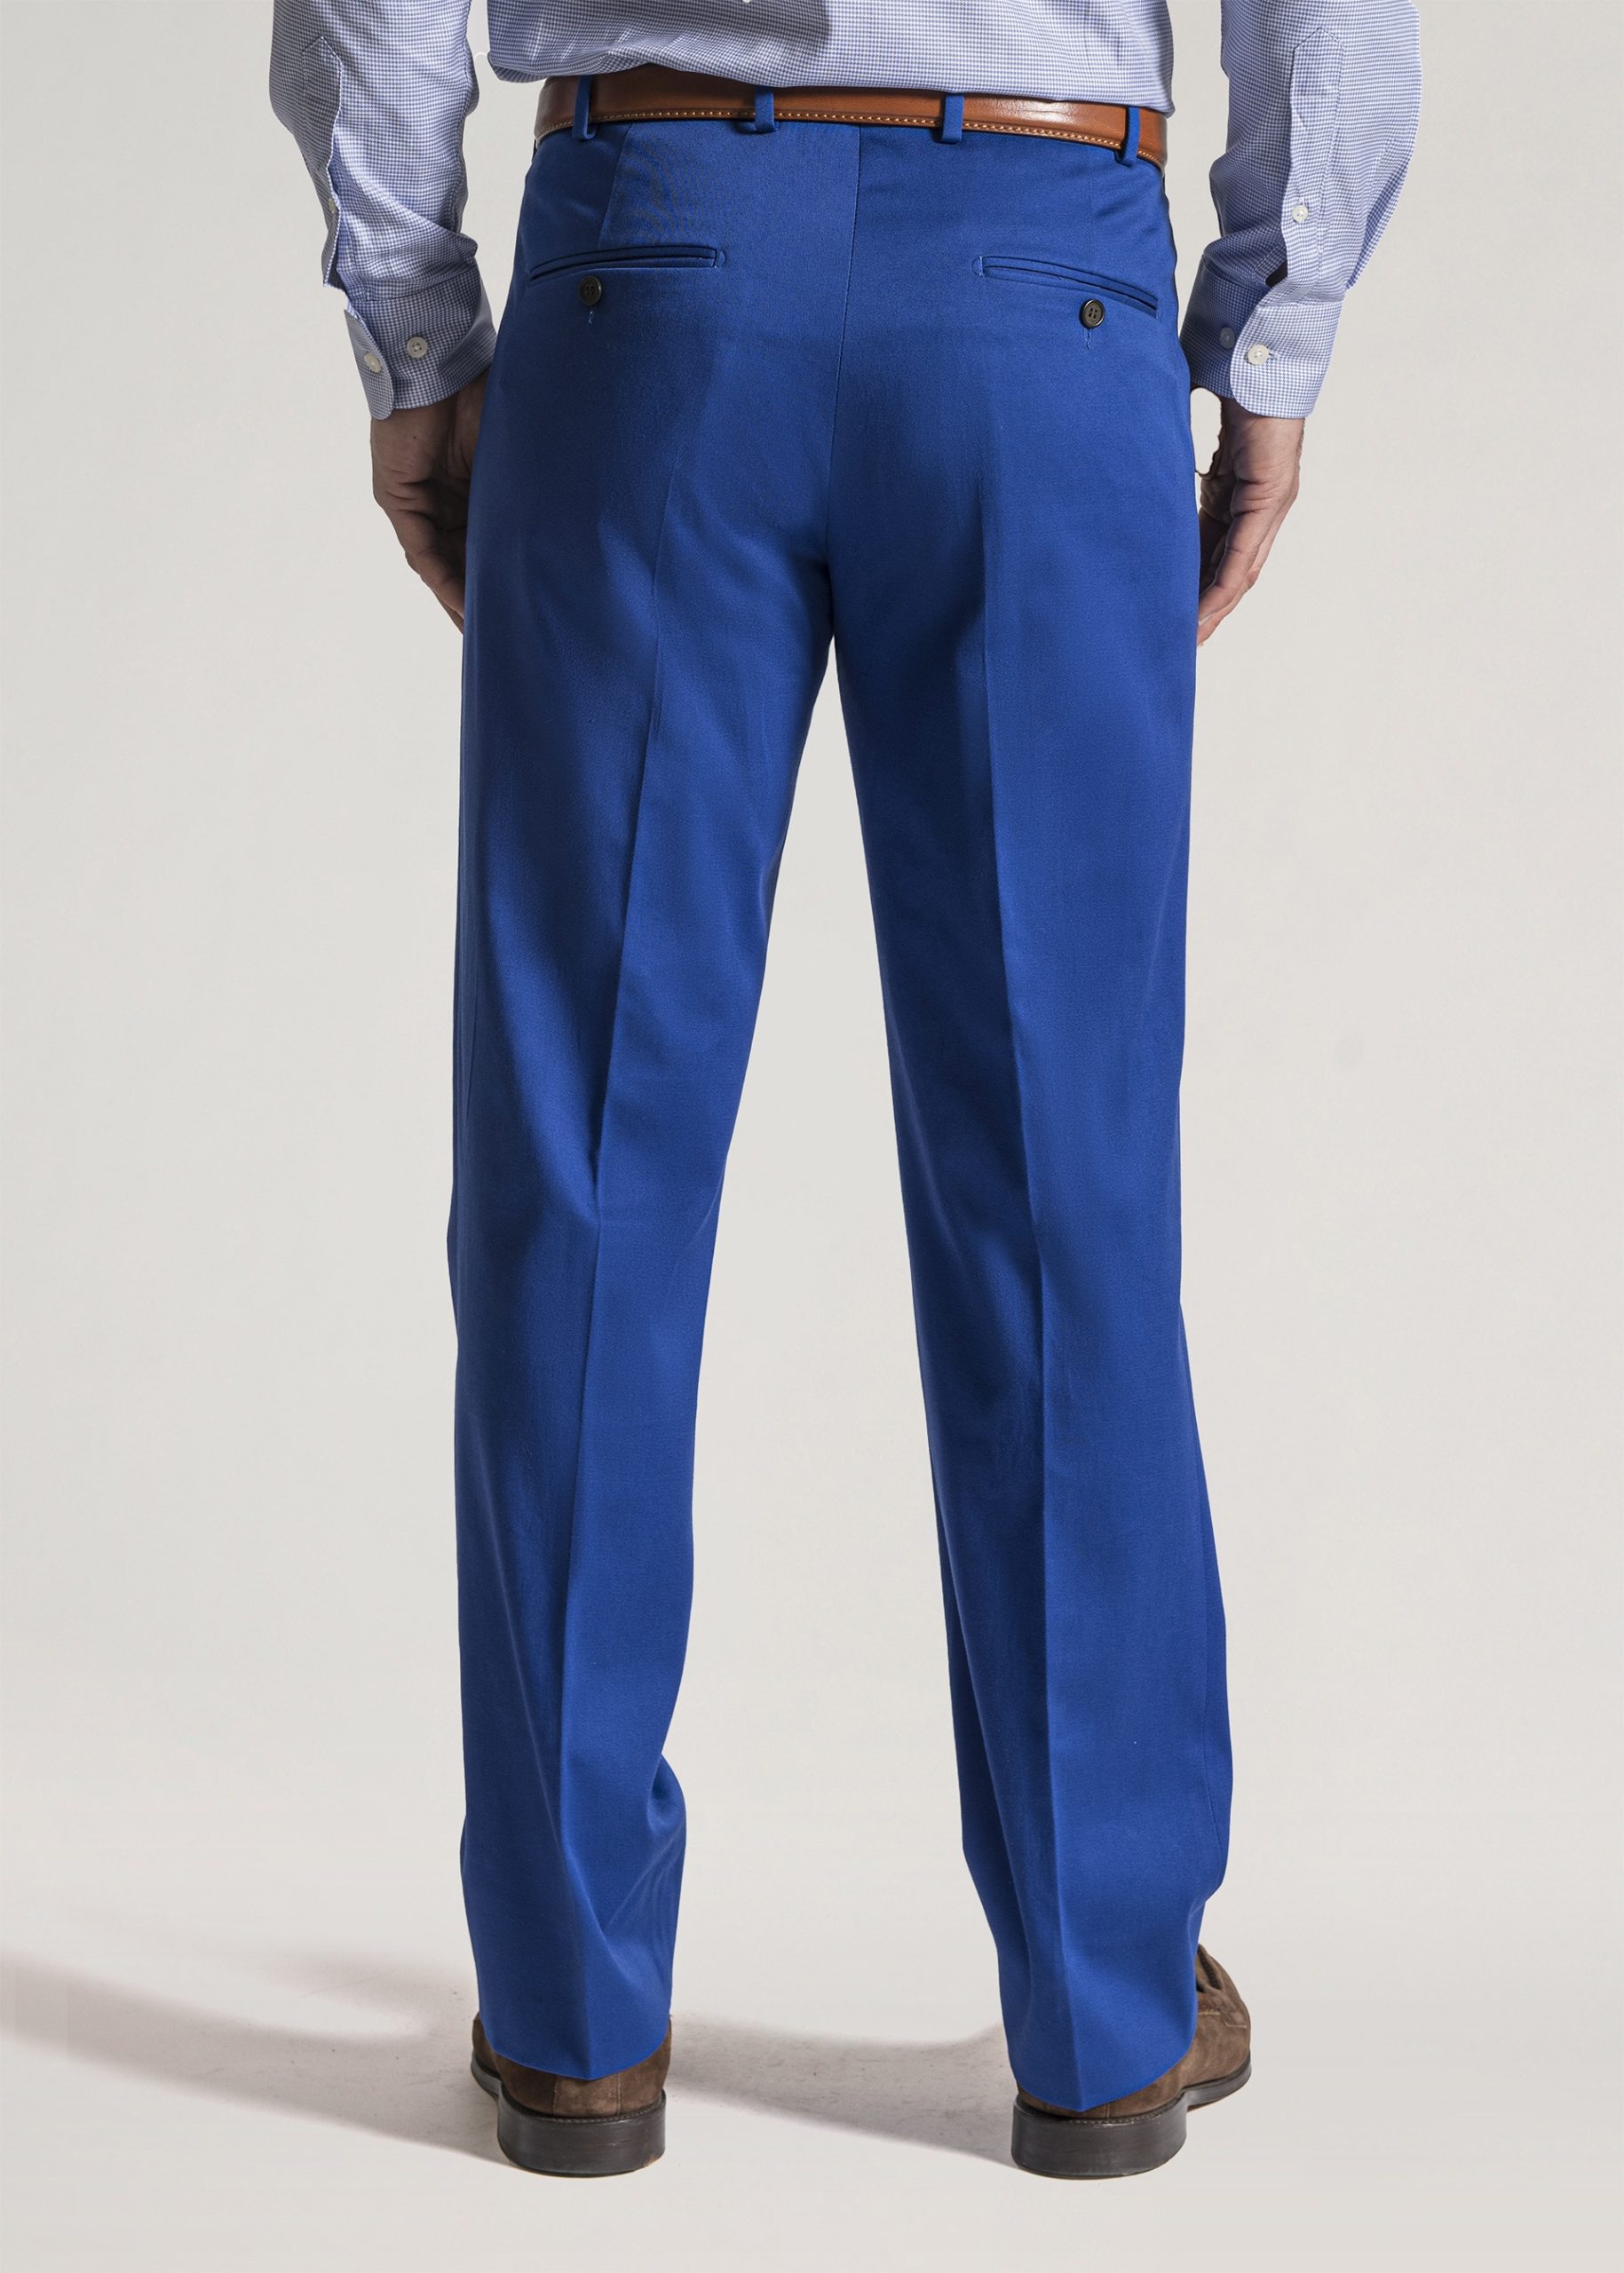 Royal coloured cotton trousers with two pockets at the back